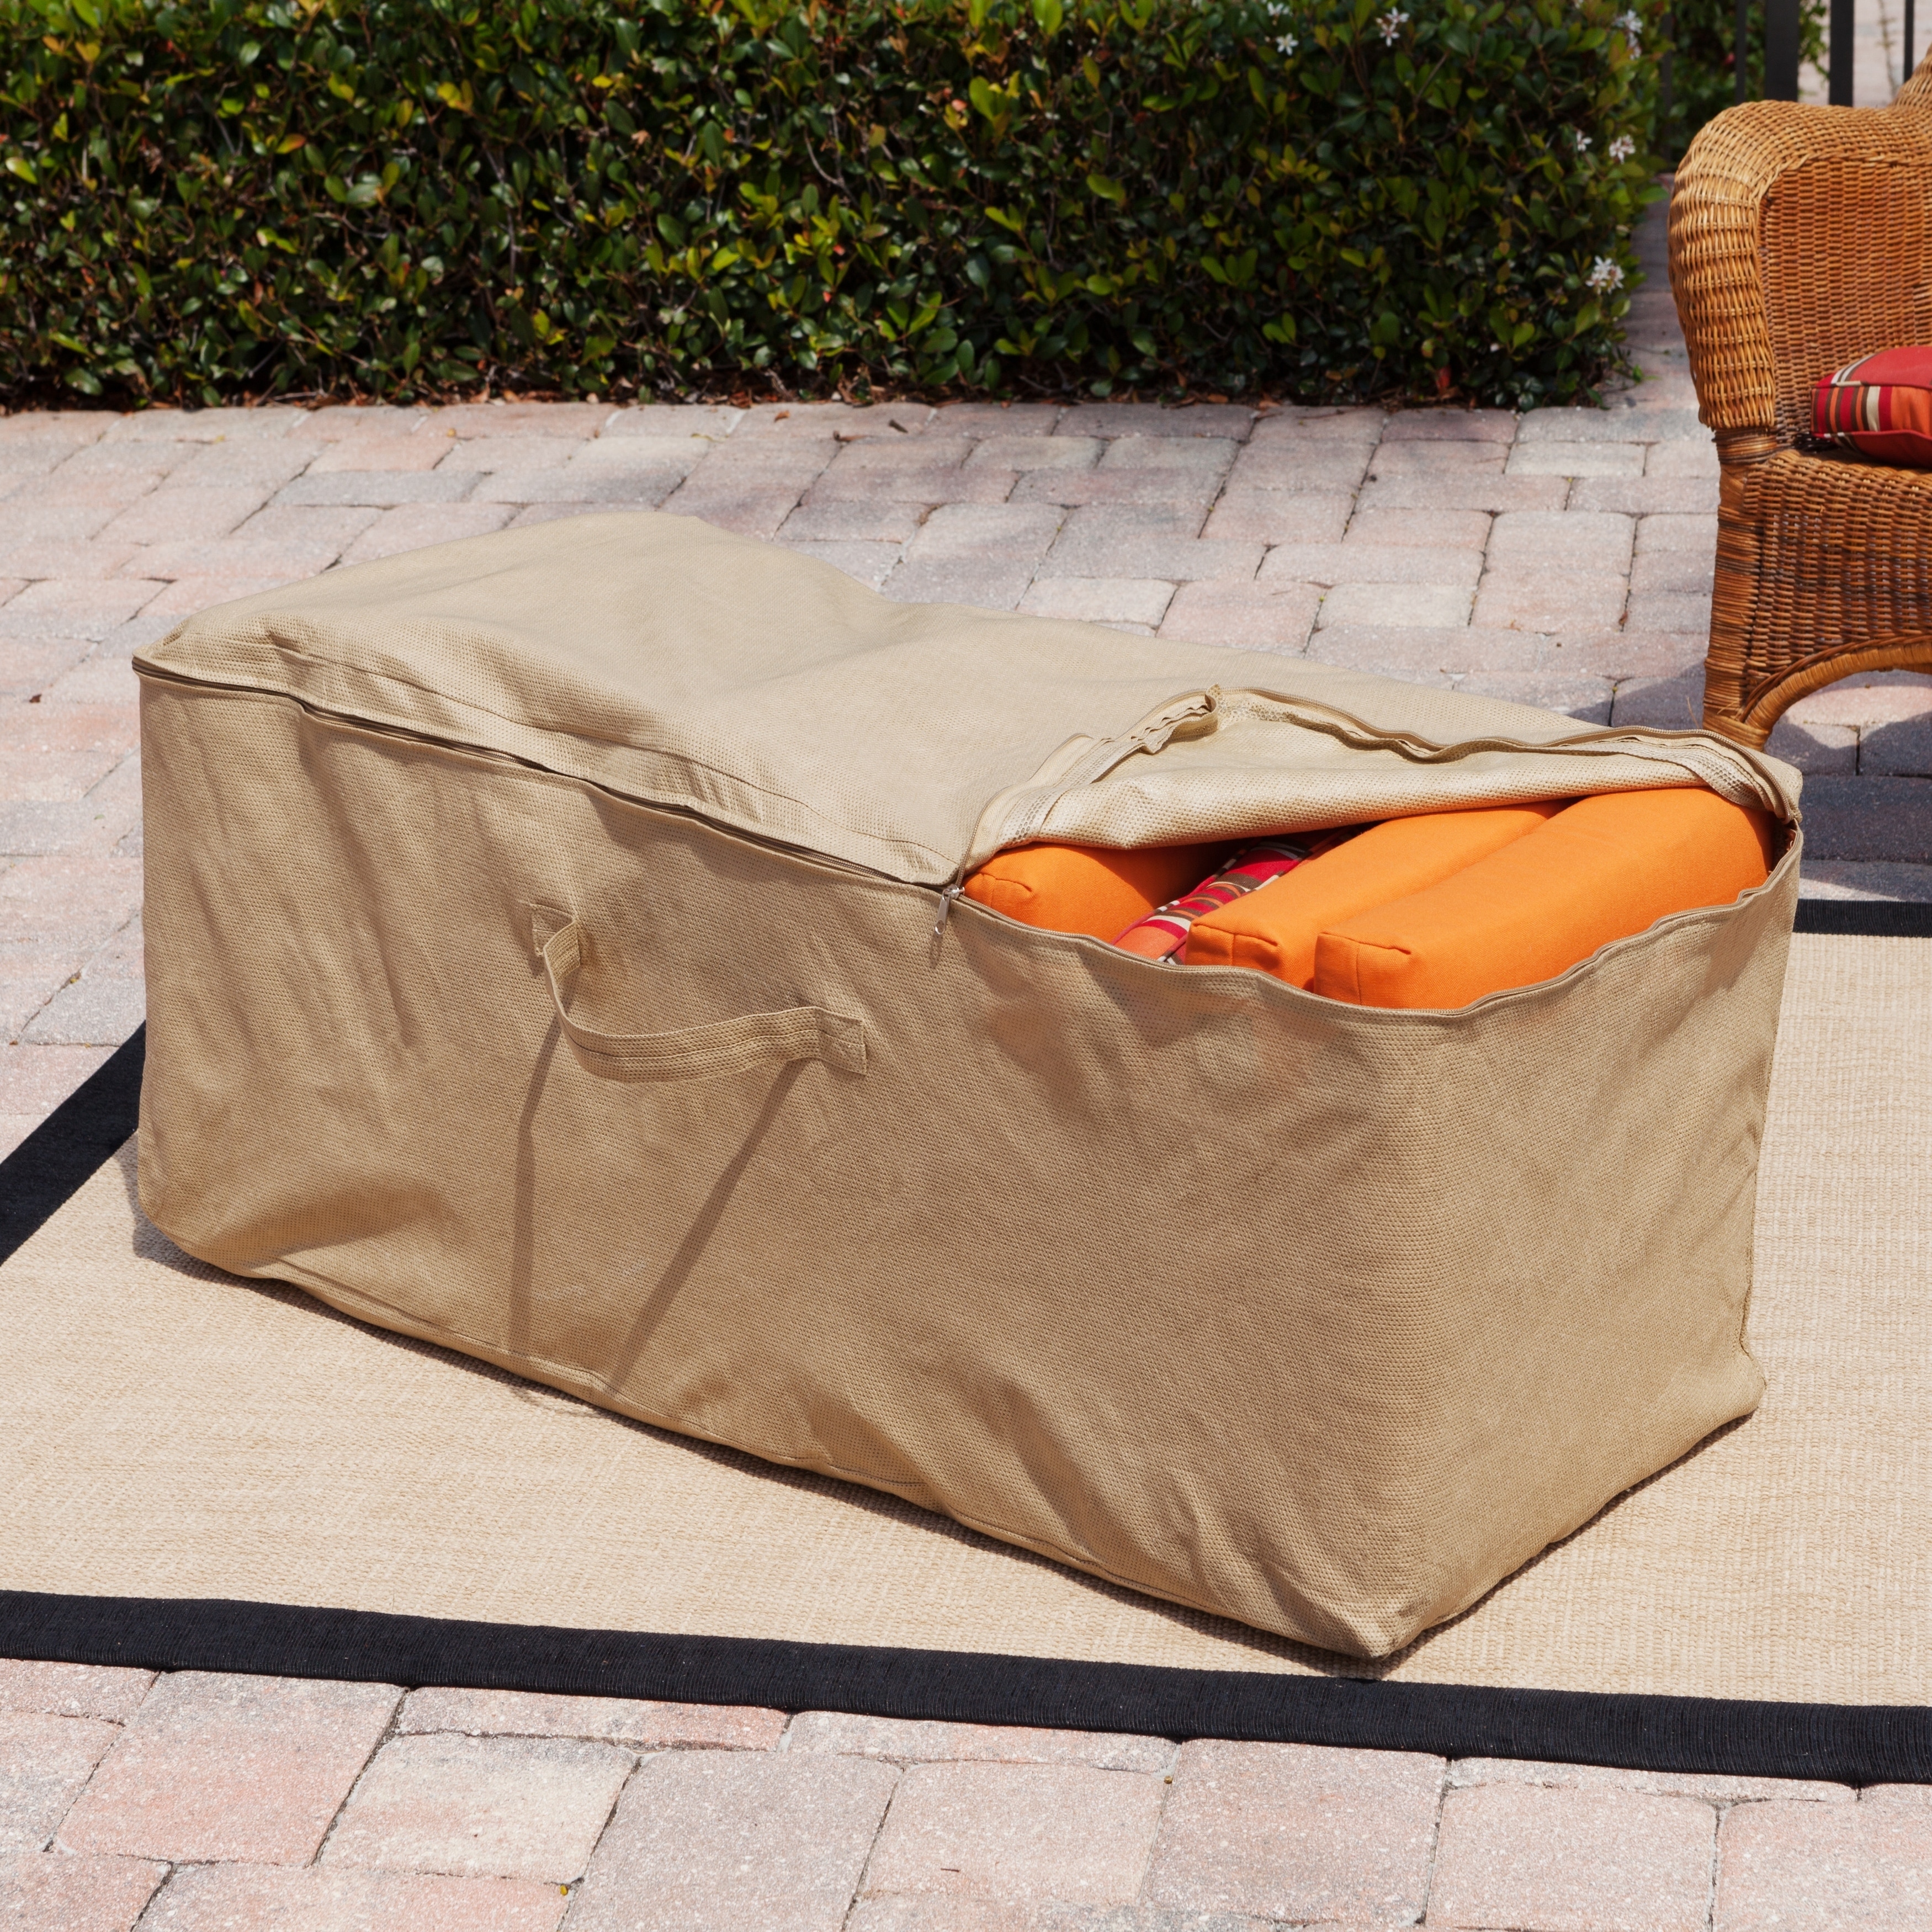 https://ak1.ostkcdn.com/images/products/30637381/Budge-Water-Resistant-Outdoor-Cushion-Storage-Bag-All-Seasons-Nutmeg-19-H-x-47-W-x-18-Deep-baa20250-d3b1-4354-83b9-c7cc1125f1b7.jpg